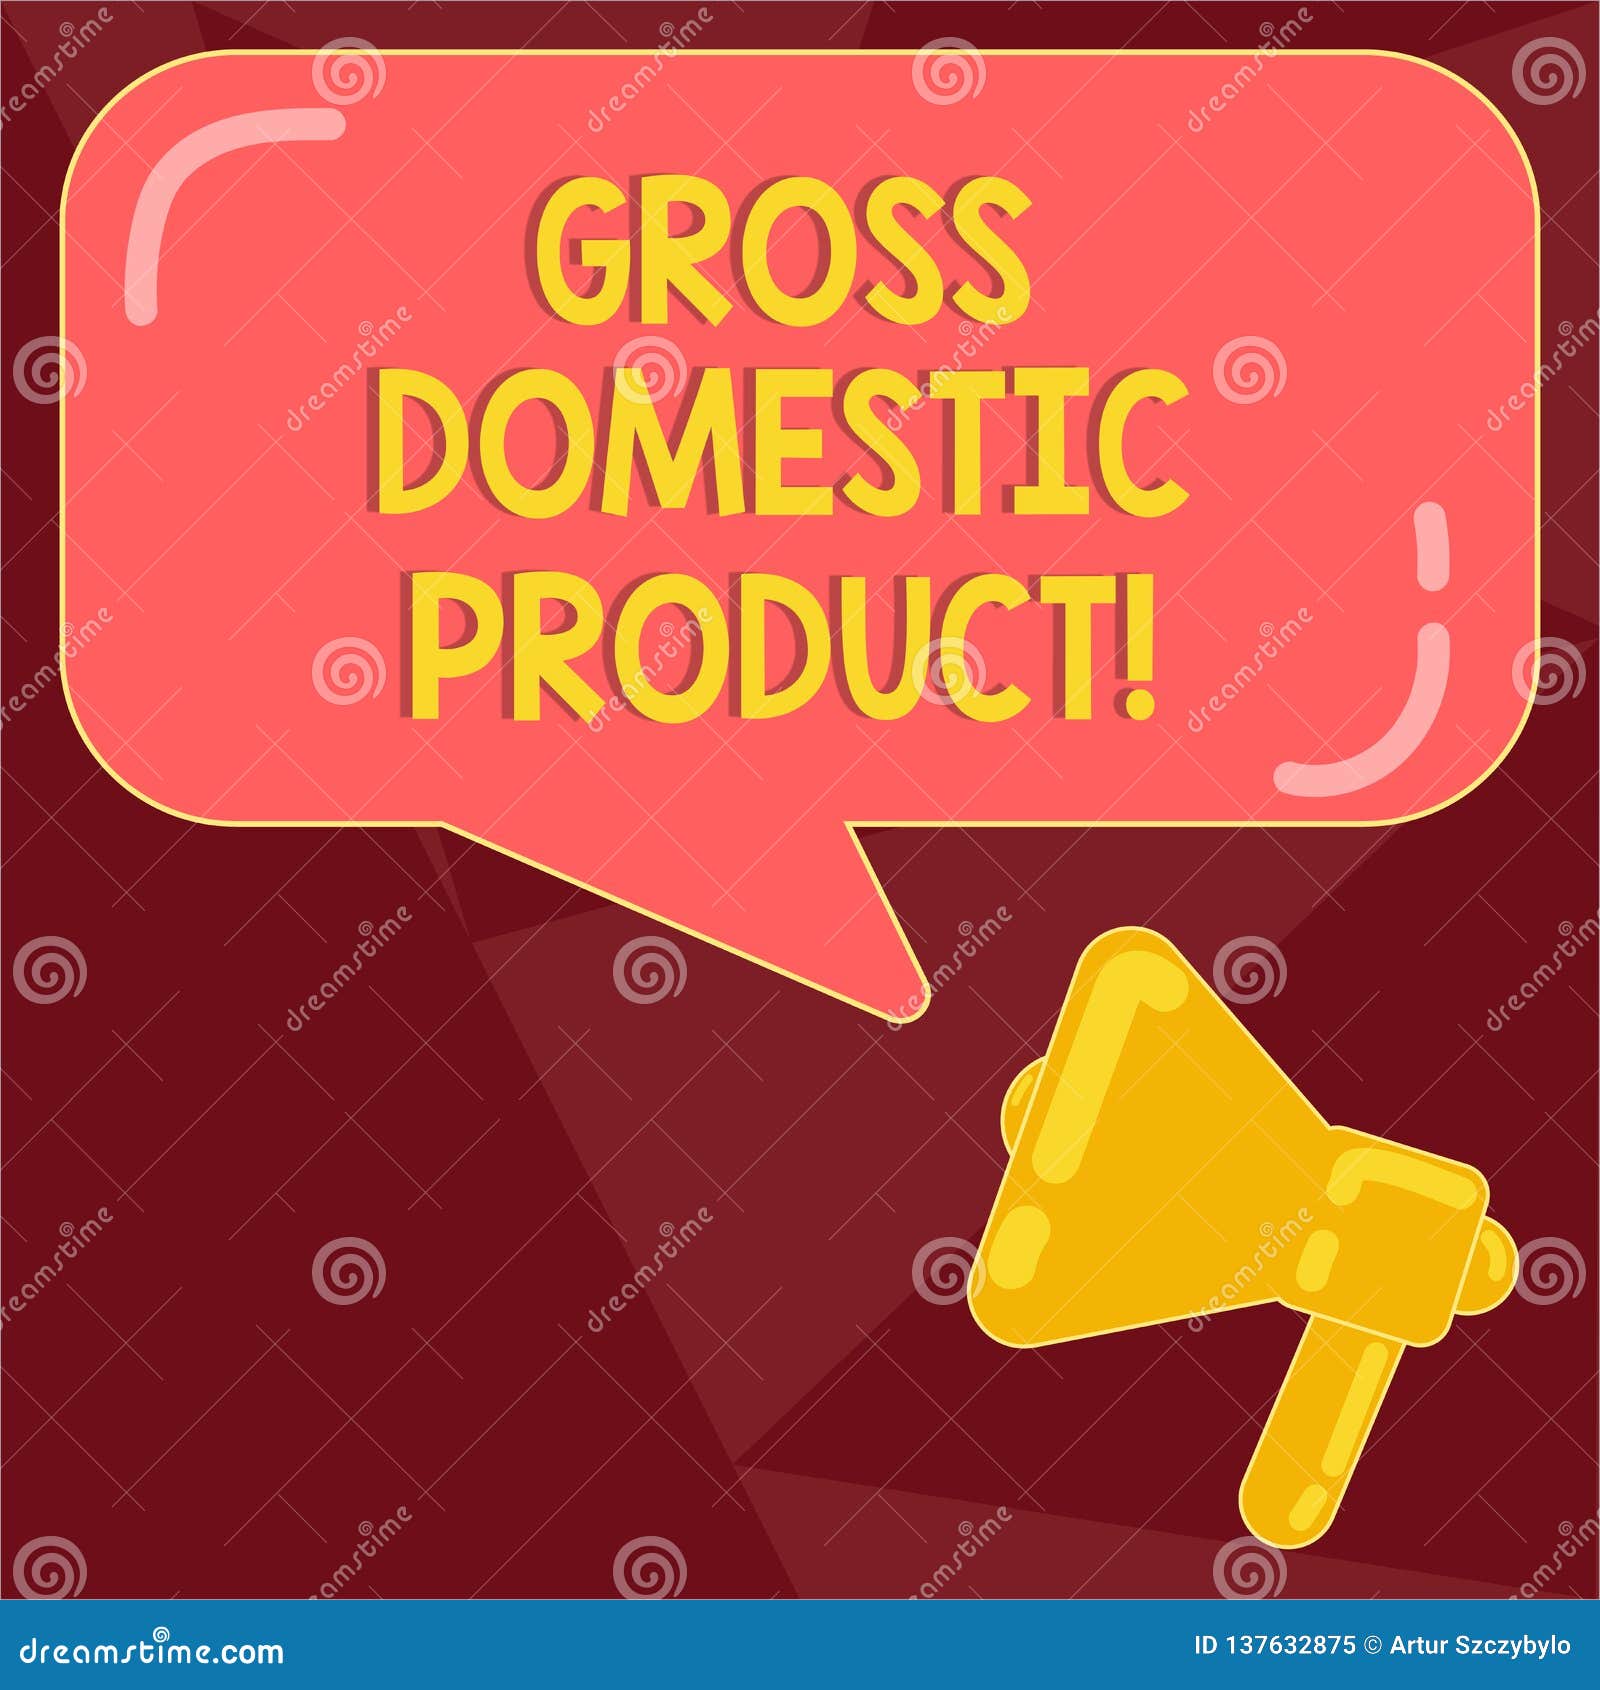 Gross Domestic Product Is The Value Of